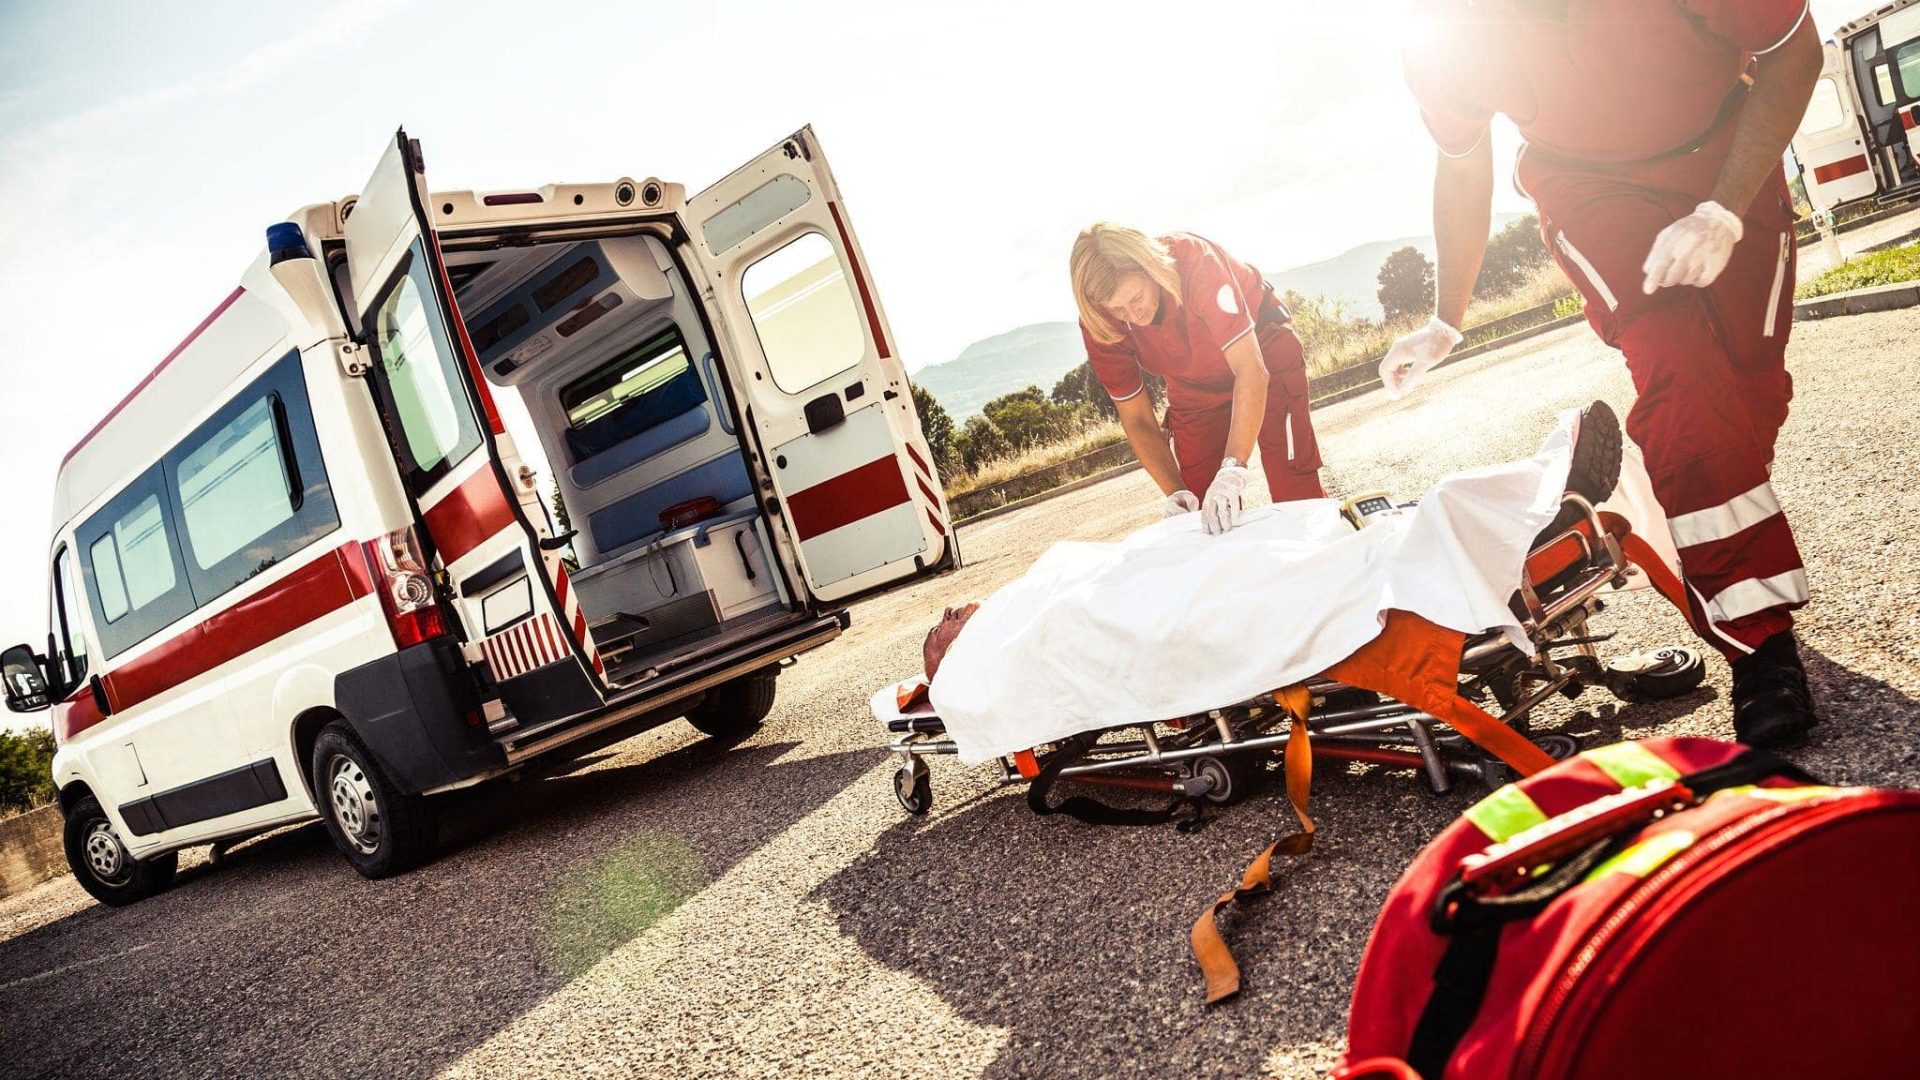 motorcycle accident injuries were diagnosed by rescuers